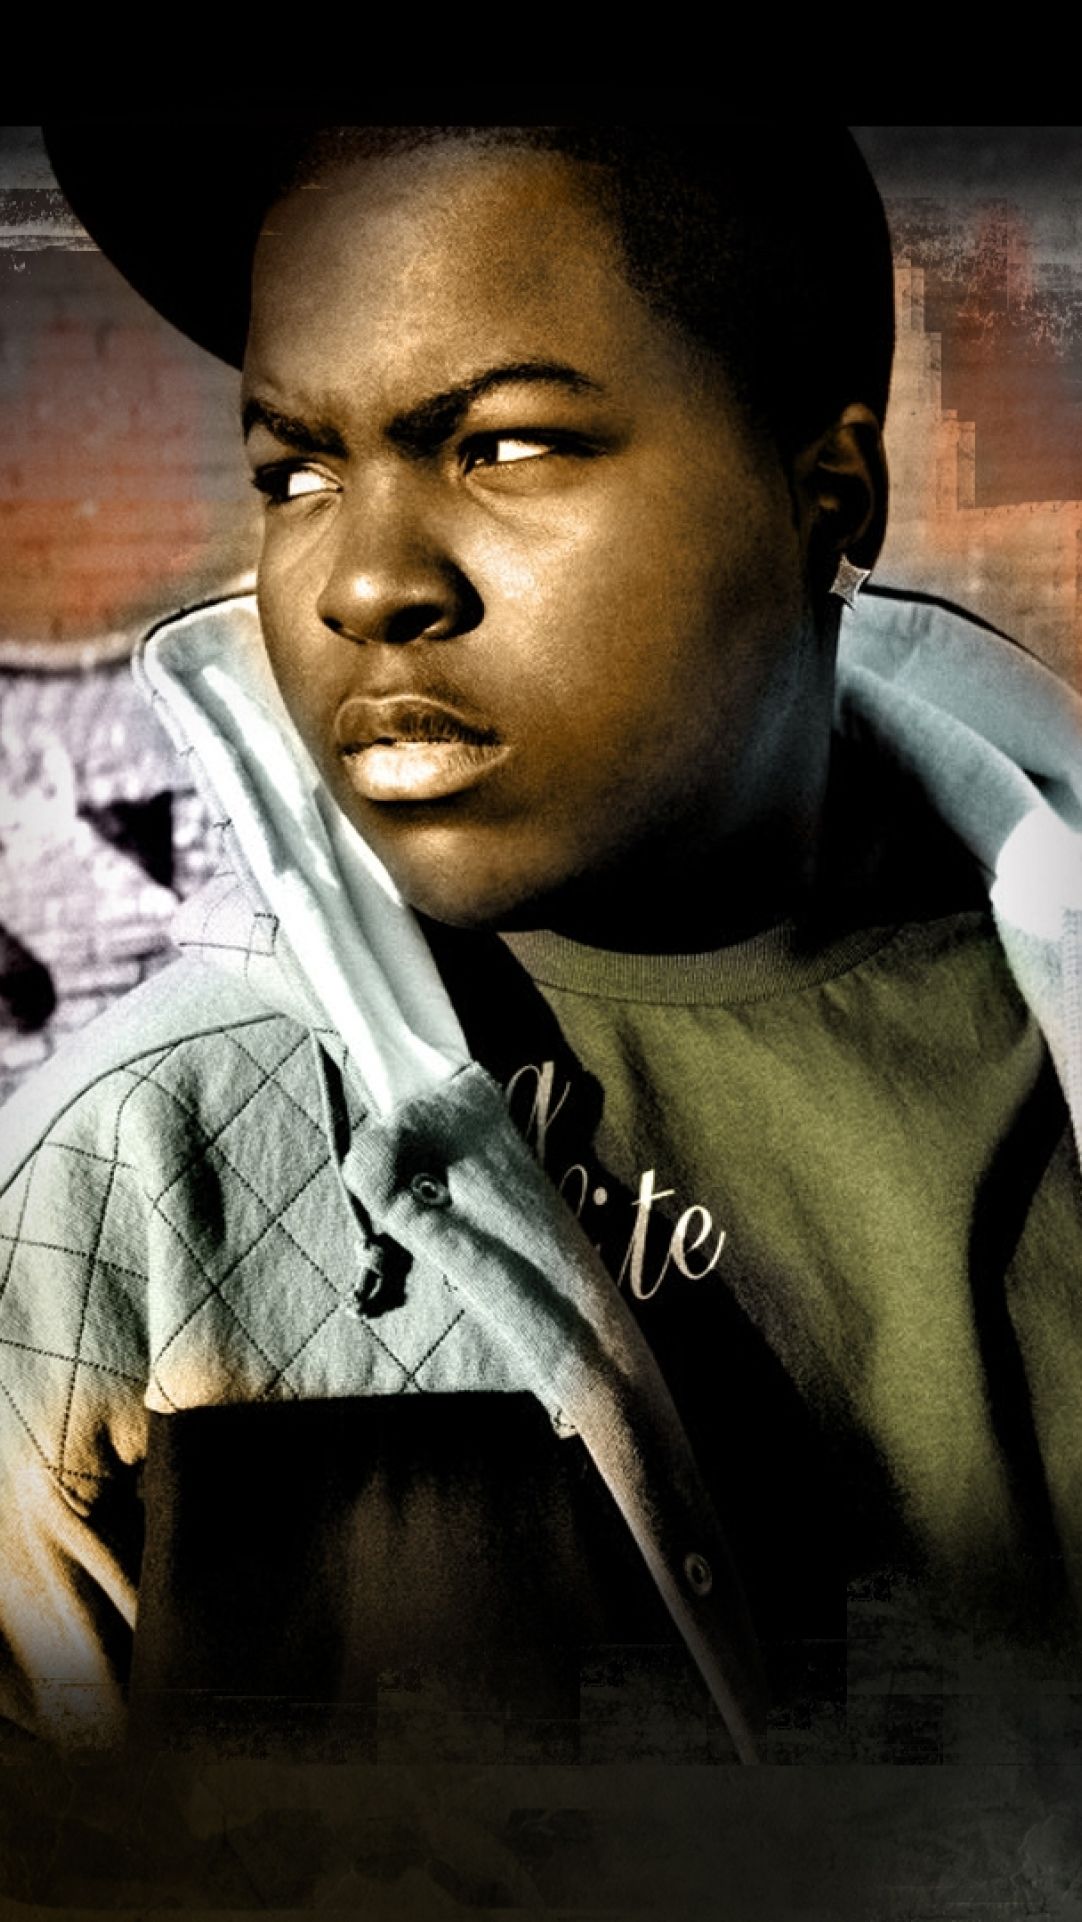 sean kingston, face, look Wallpaper, HD Music 4K Wallpaper, Image, Photo and Background